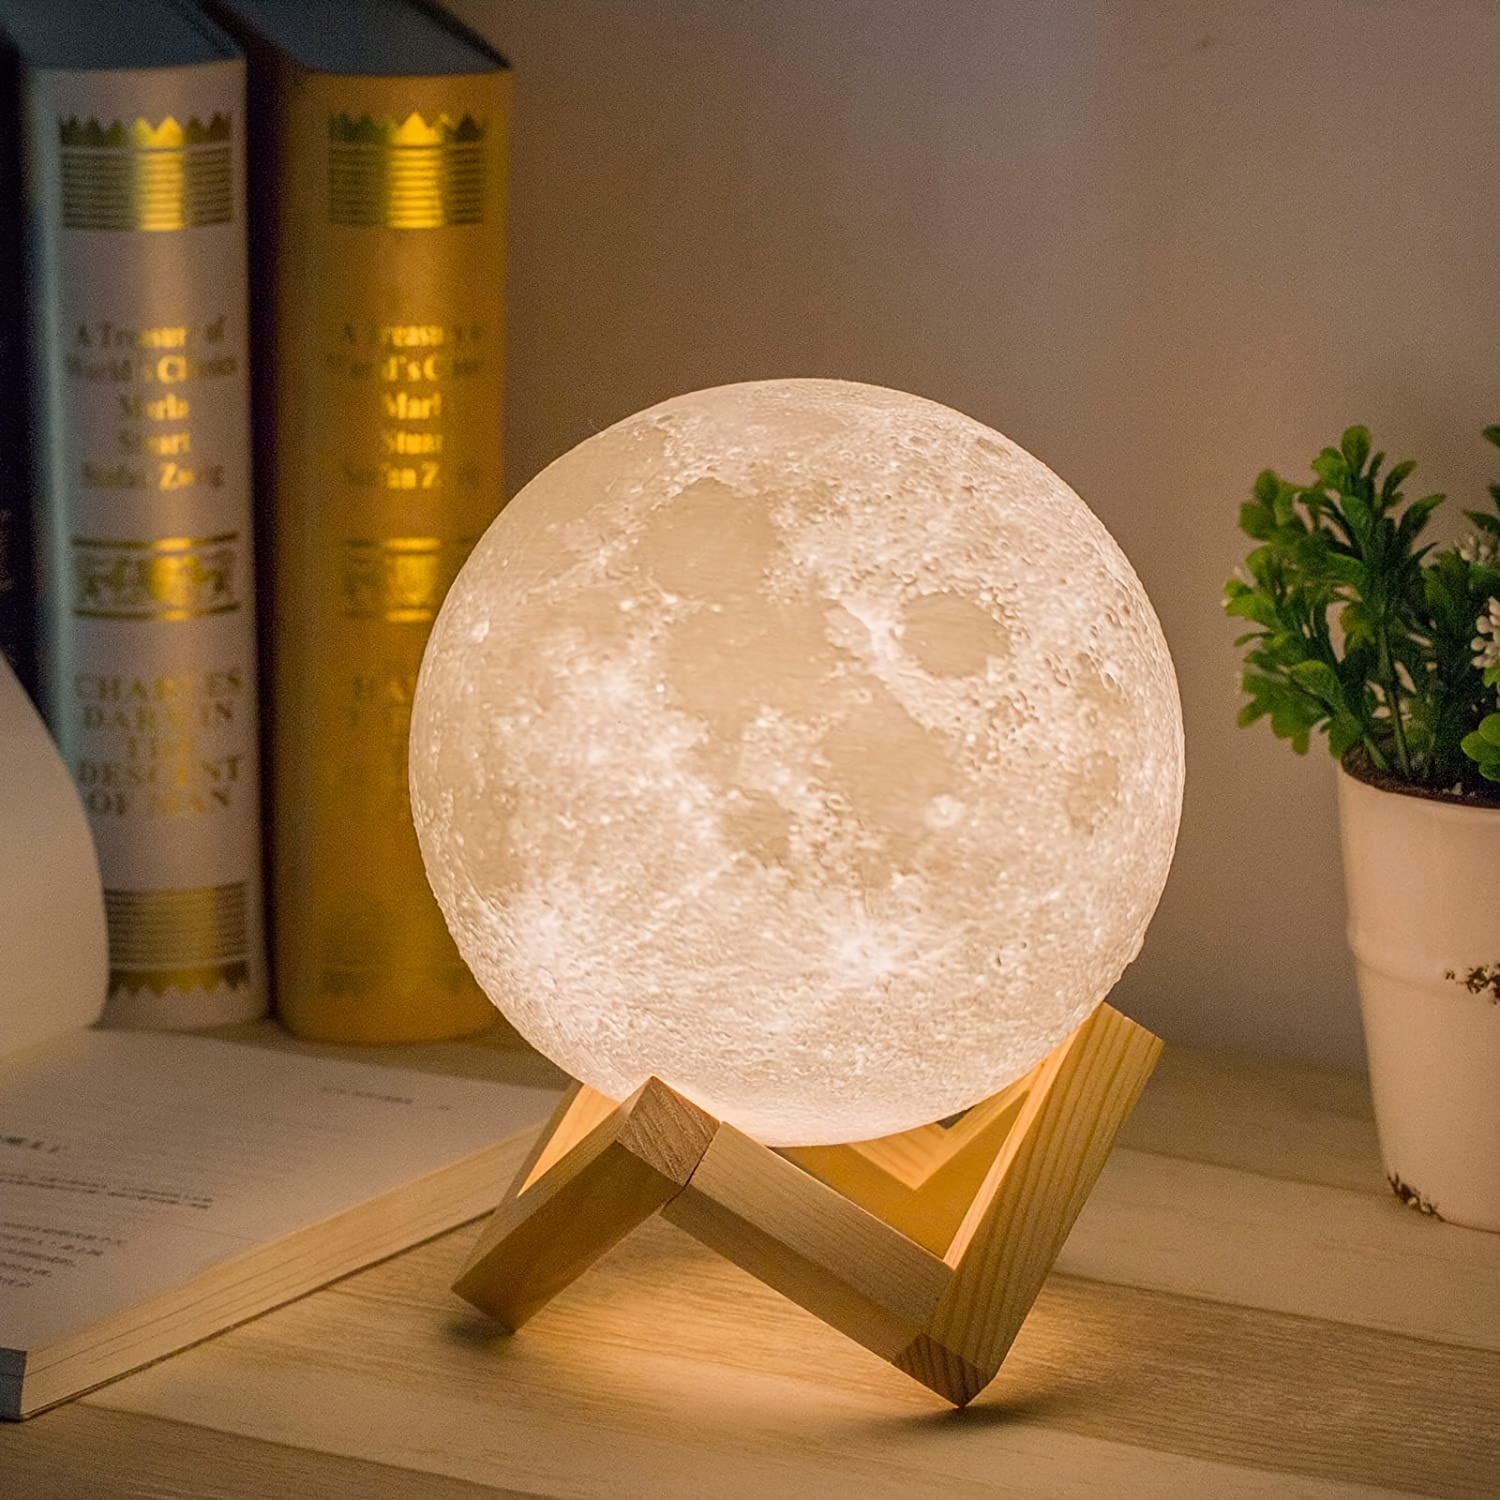 1pc 3D LED Moon Light With Stand, 5.98inch, 16 Colors Night Light Remote  Control Galaxy Light, USB Plug-In Birthday Gift For Home Decor